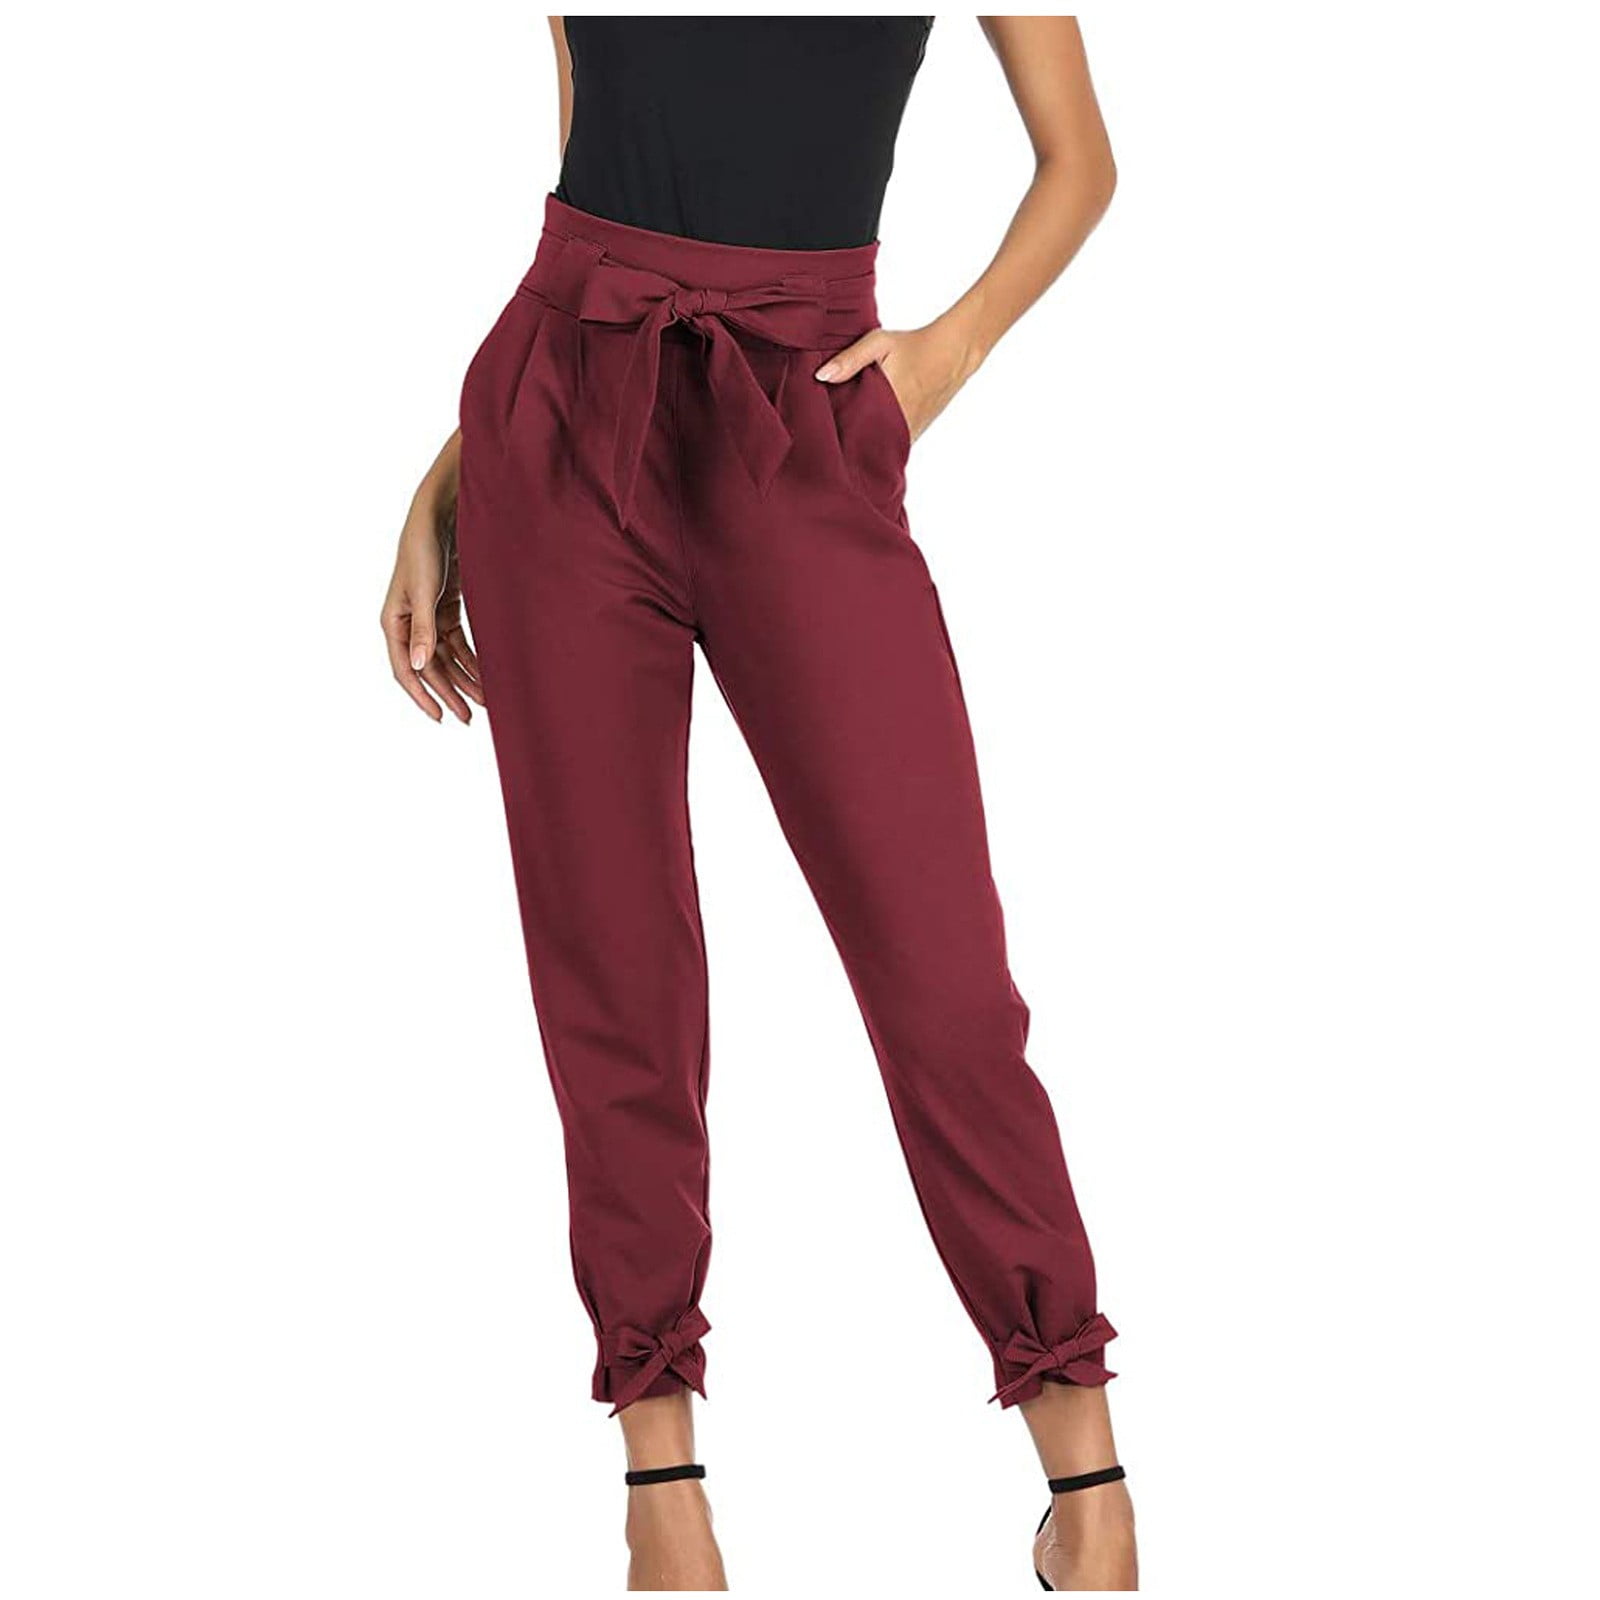 Capri Pants For Women Fashion High Waisted Ruffle Sequin Cloth Style Foot  Tape Pants For Women 